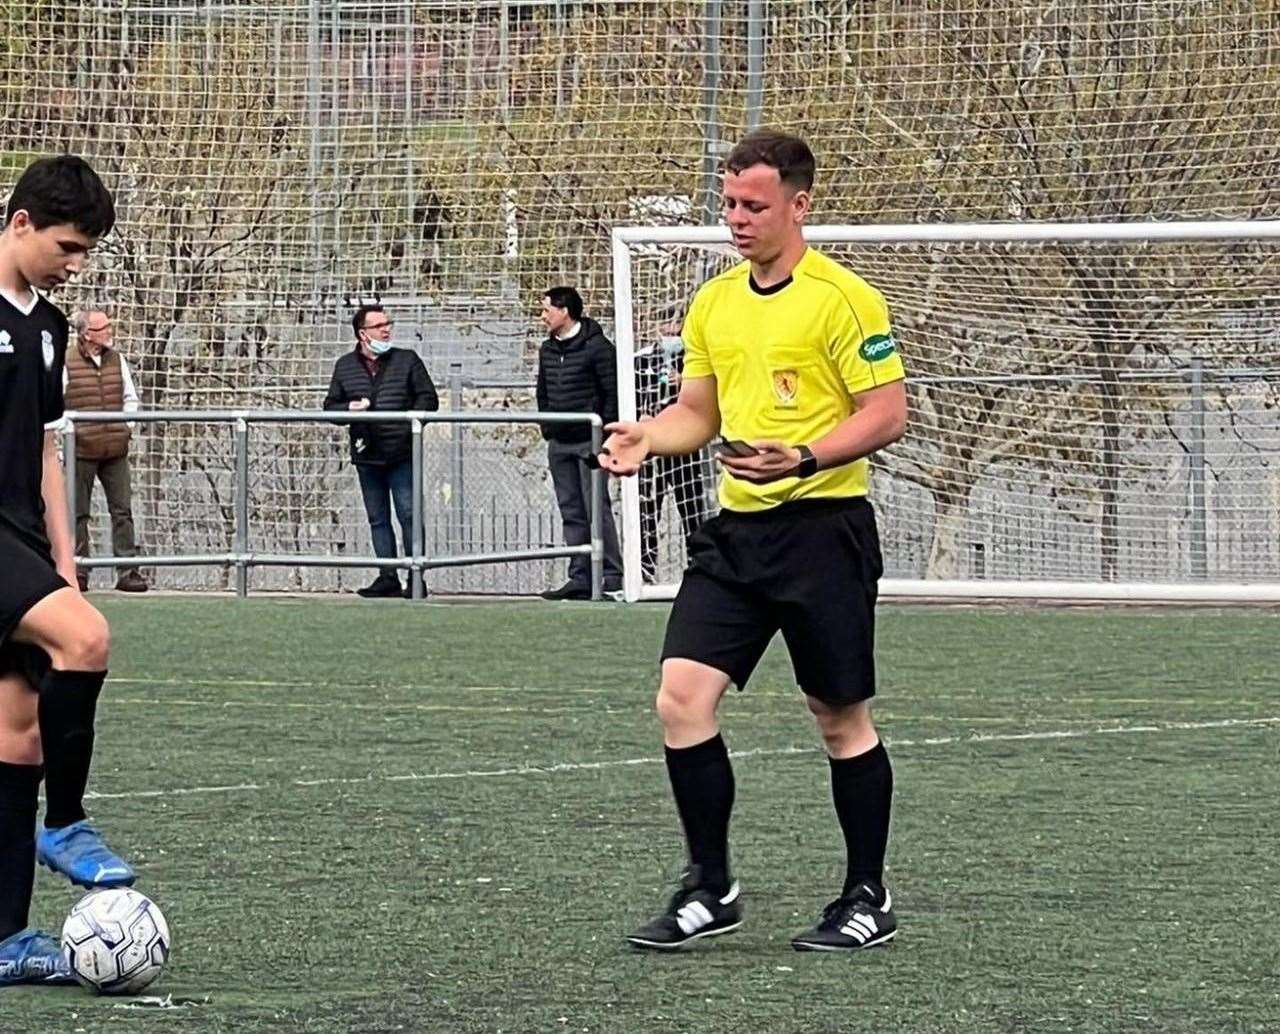 Rhys-Jones has officiated matches involving the youth teams of major European clubs.